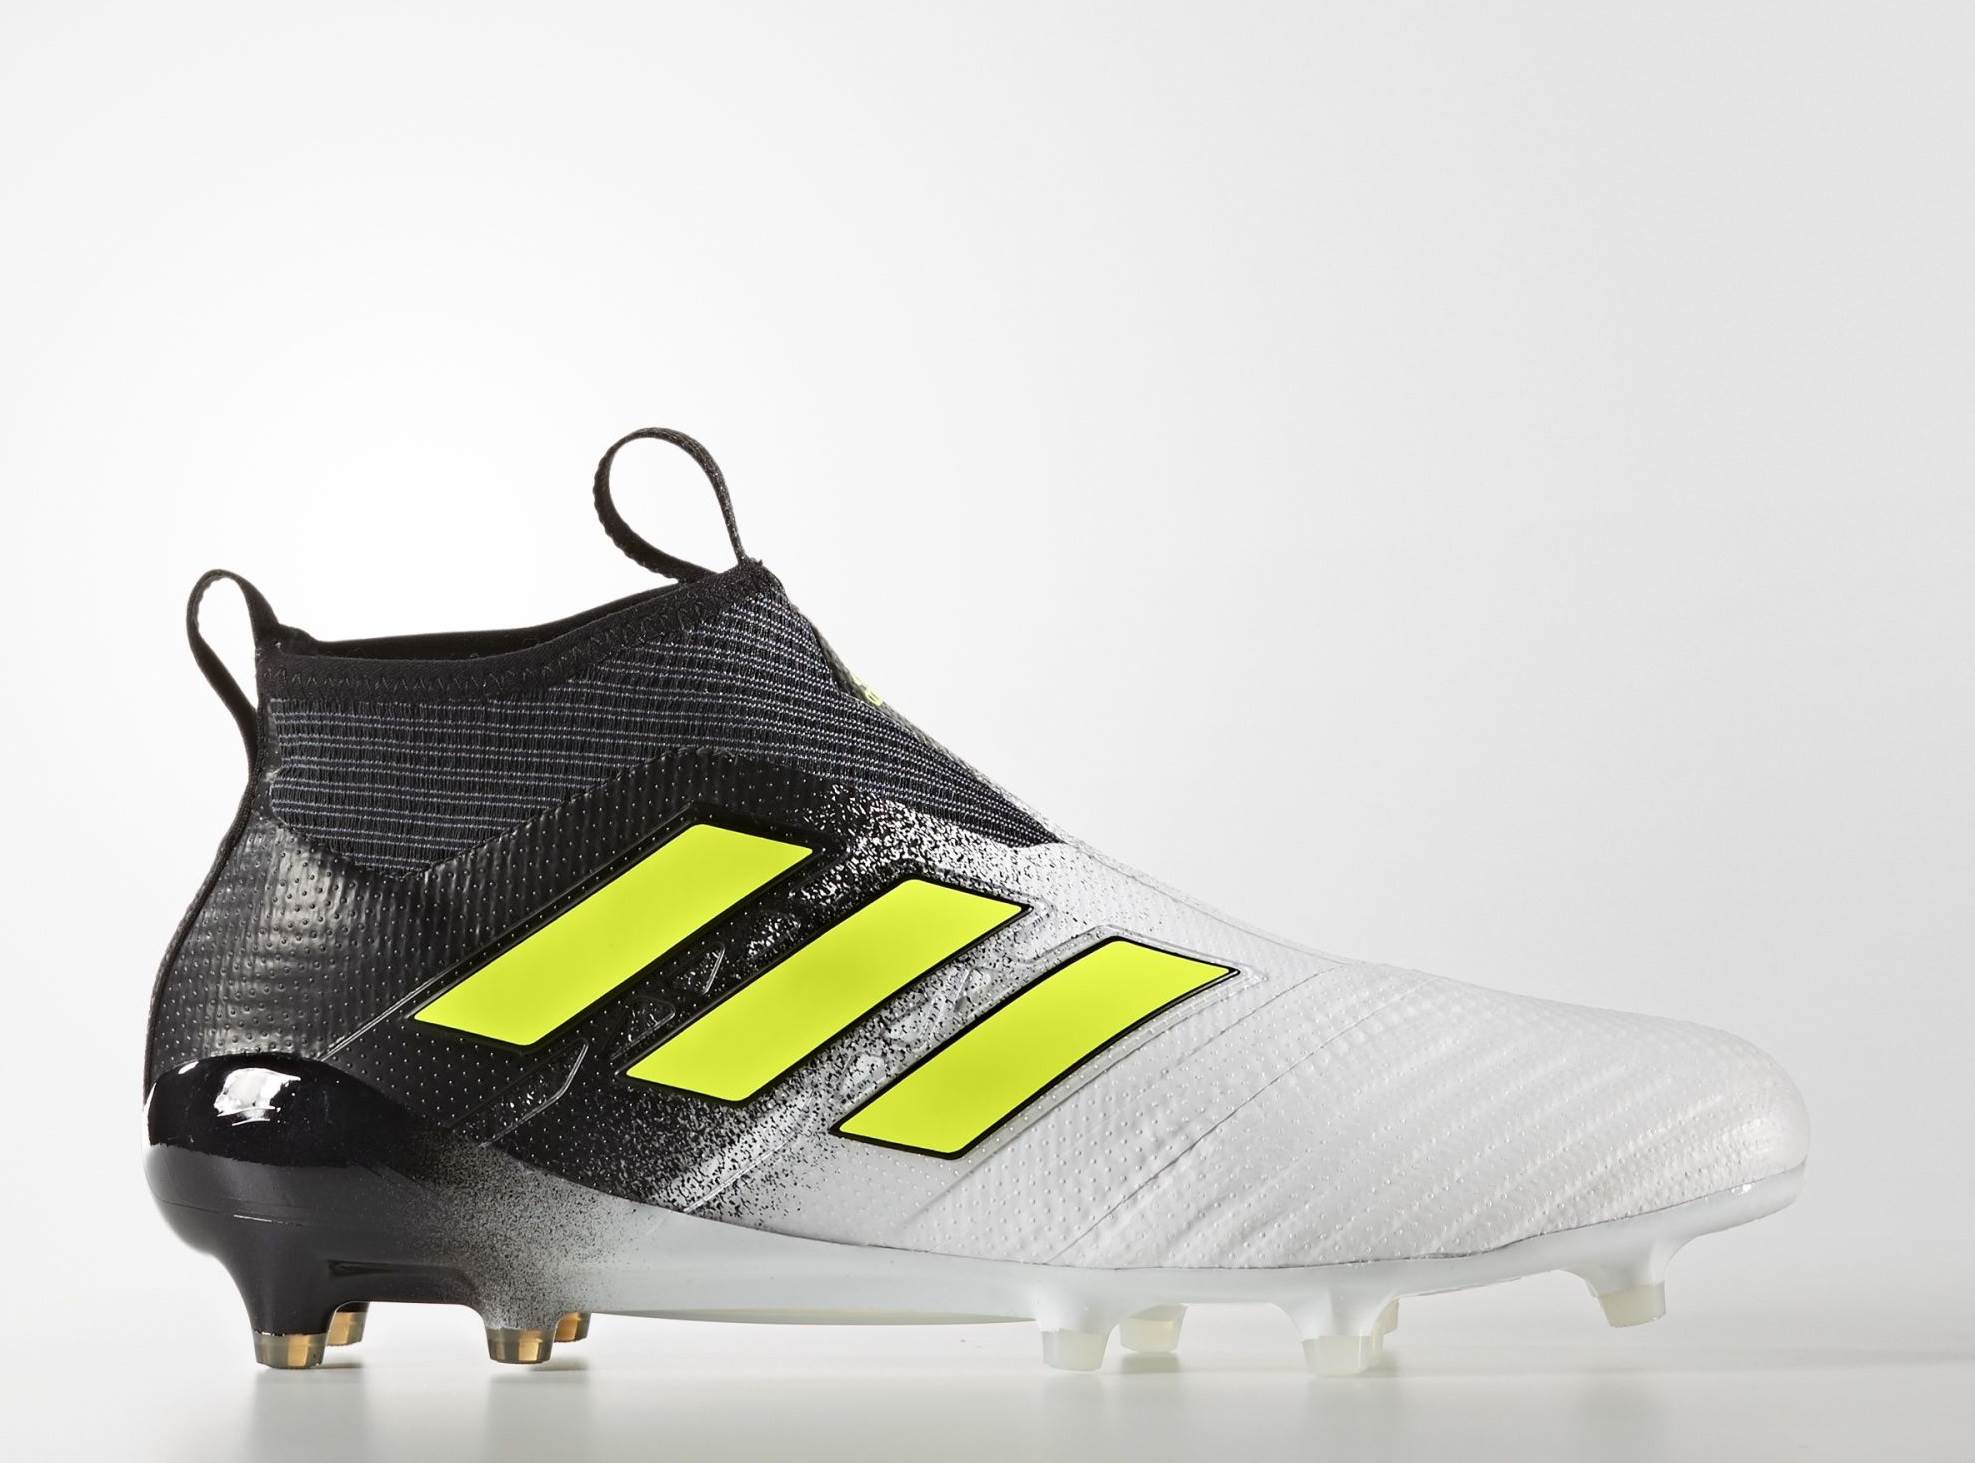 Gallery: adidas Ace 17+ Purecontrol boots - Boots - FTBL Life